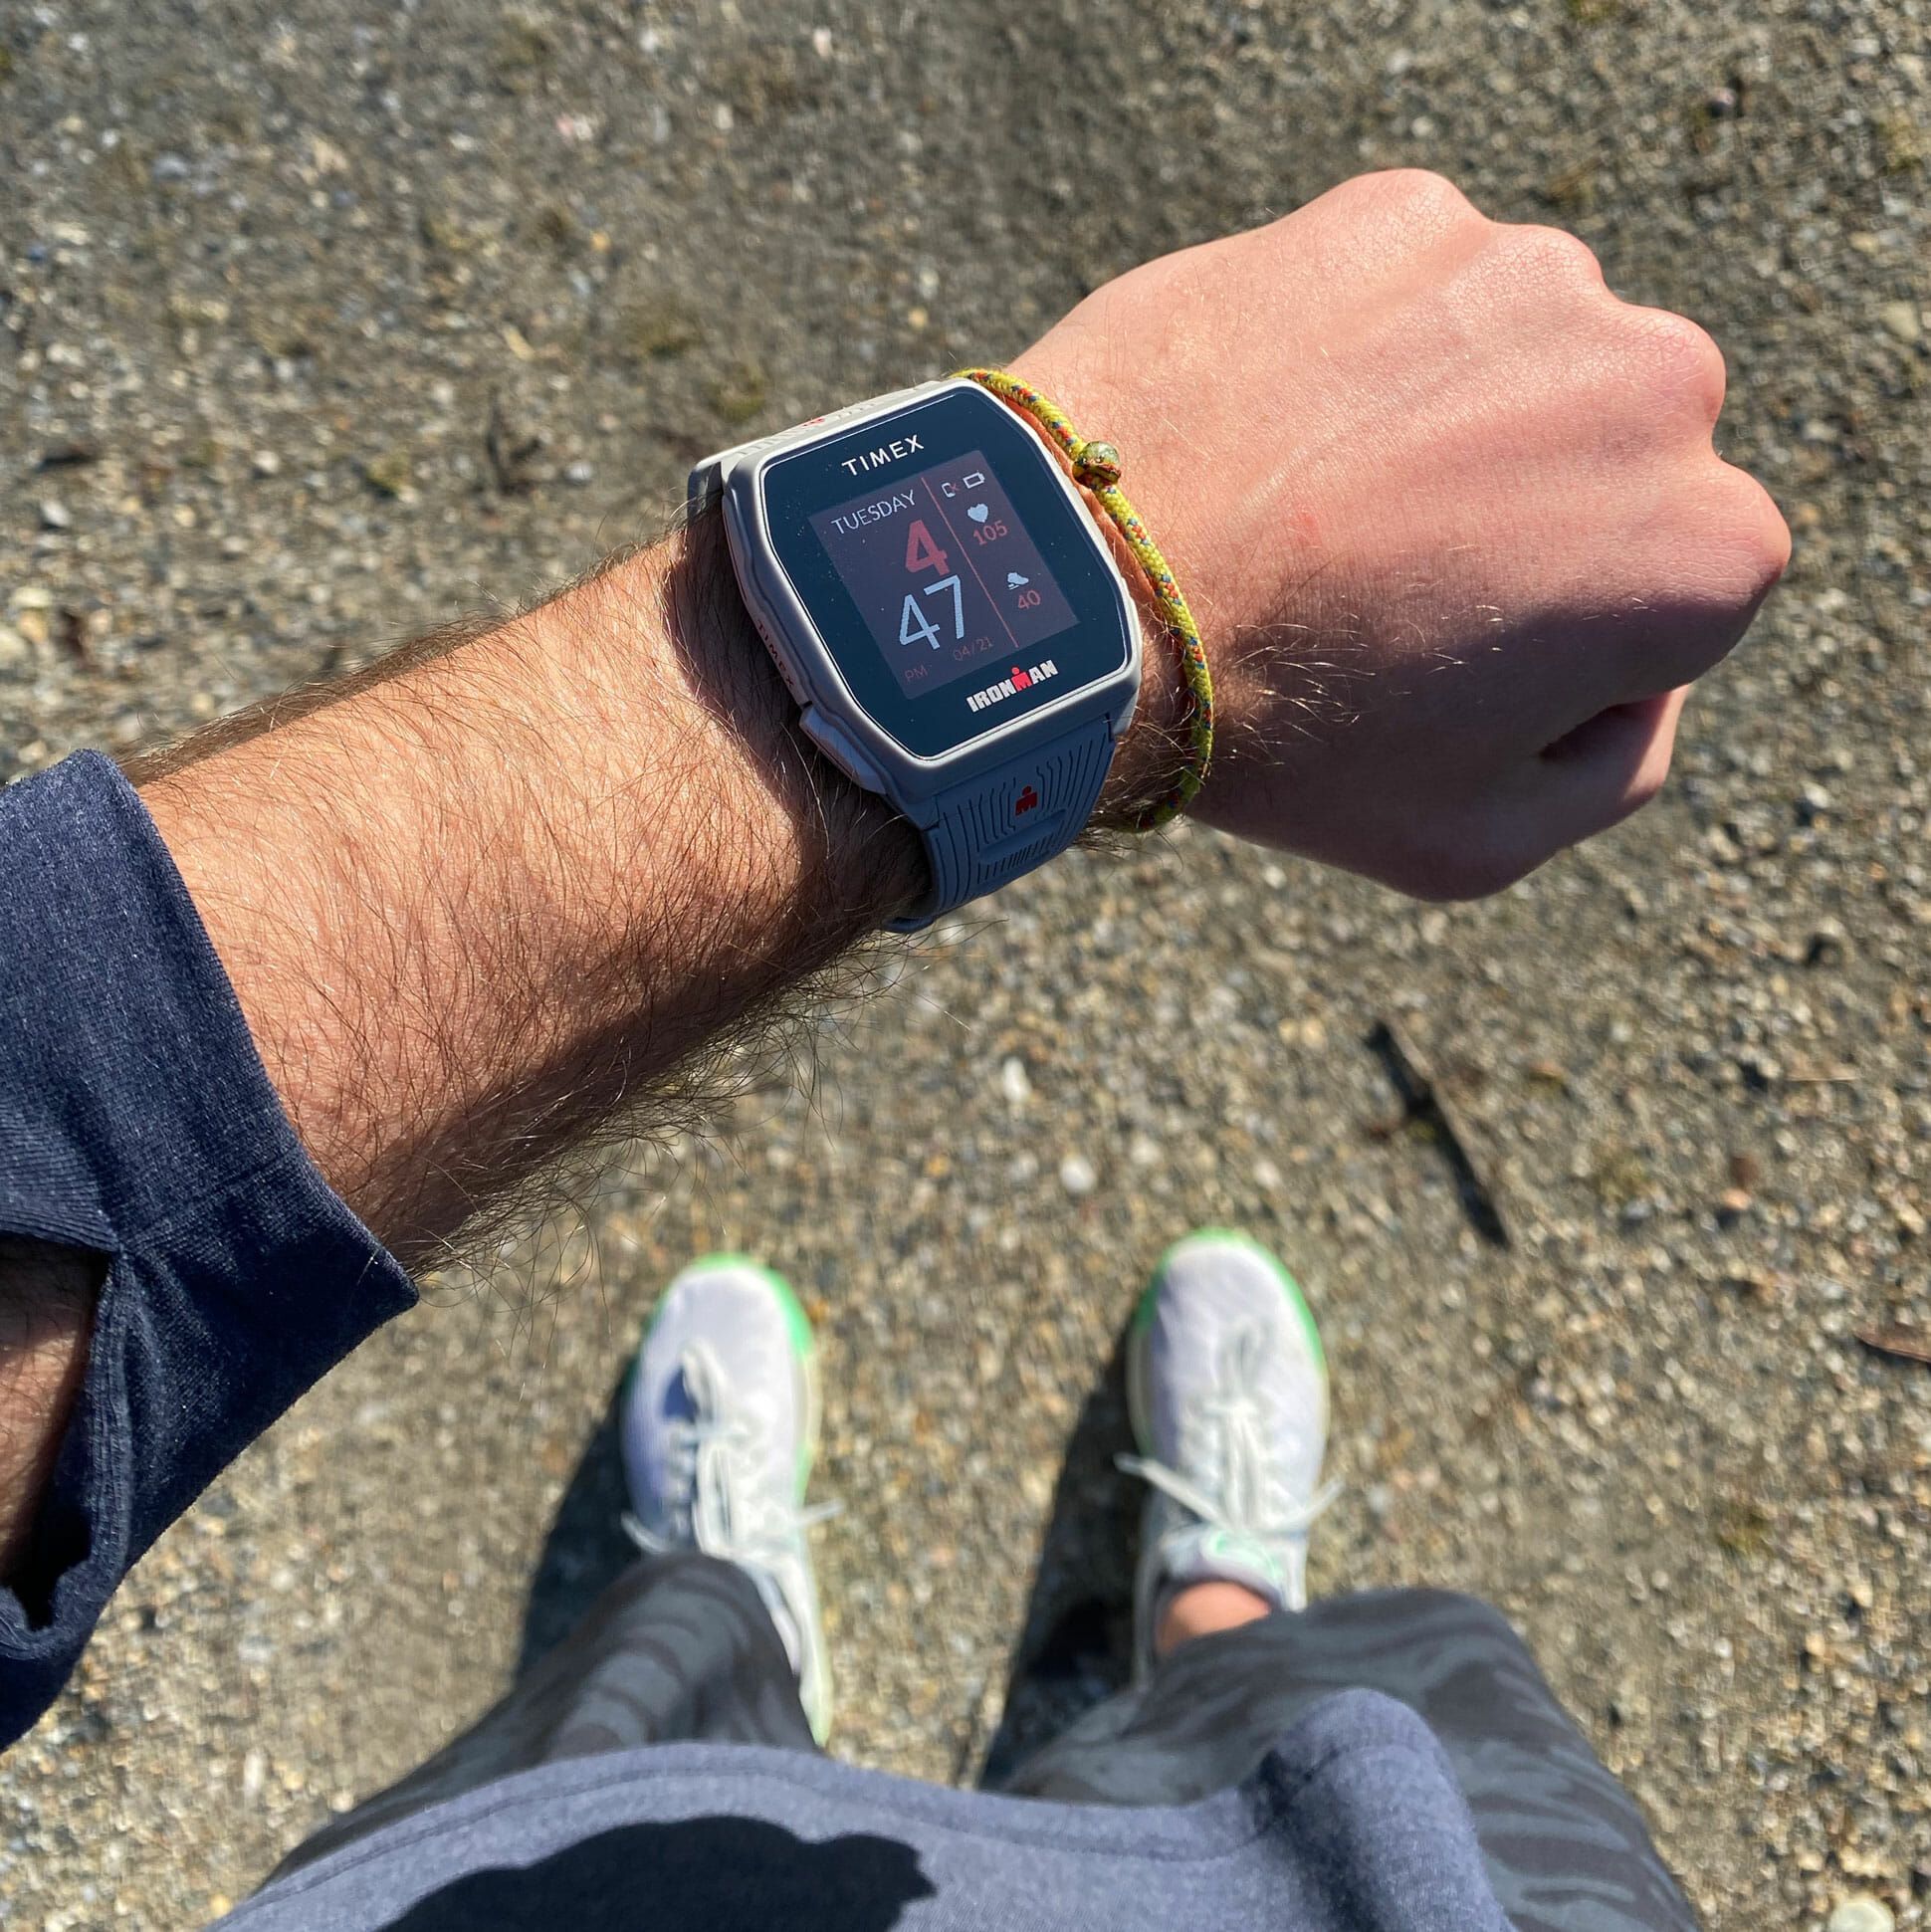 Quick Review: Timex Made an Awesome, Affordable GPS Watch